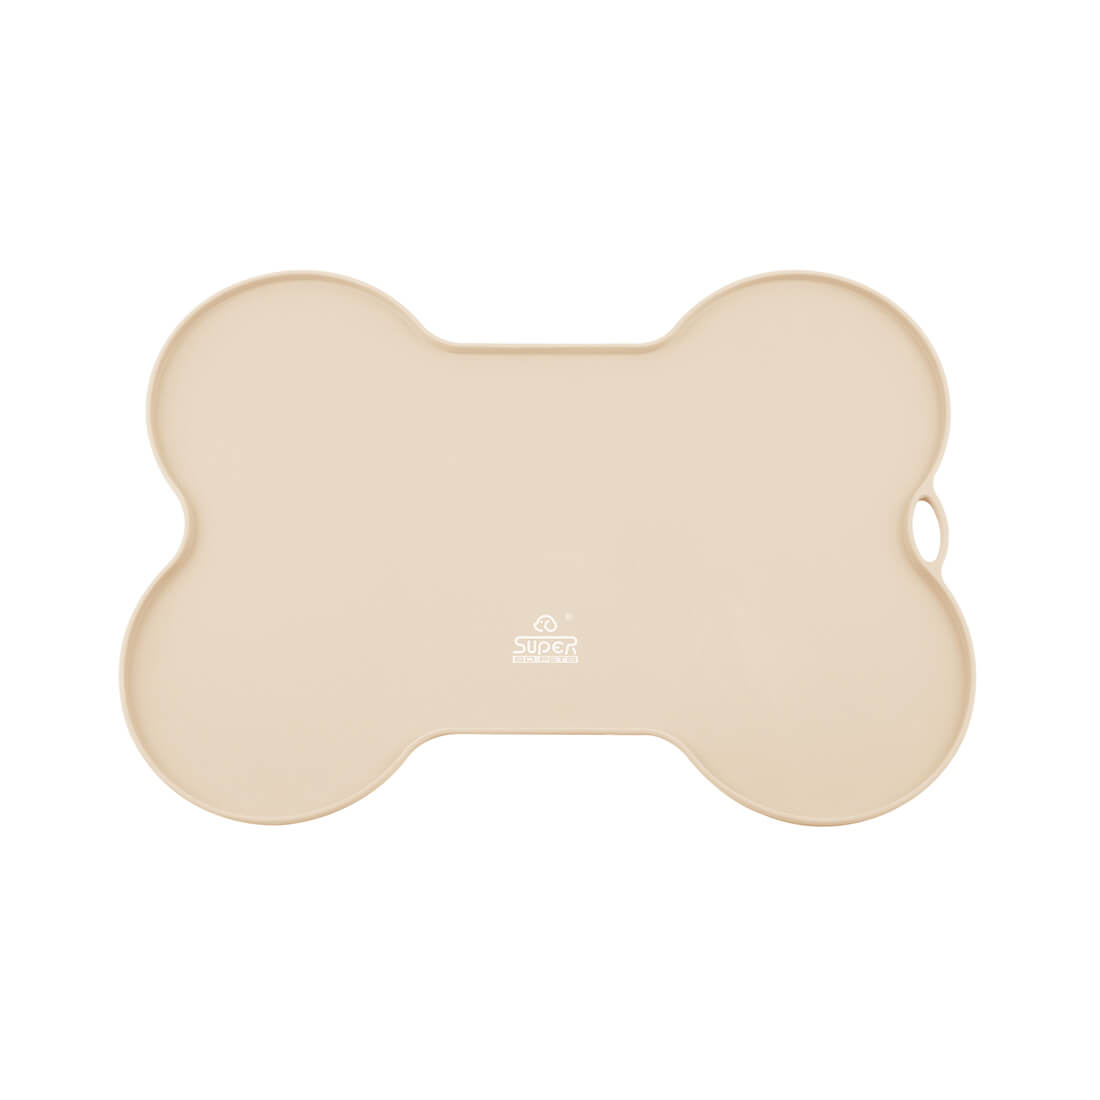 Ralxion Sand Beige Dog Feeding Mat, Absorbent Mats for Cat Dog Food and Water Bowl, Dispenser, Aesthetic Solid Sand Yellow Beige Pet Placemat for